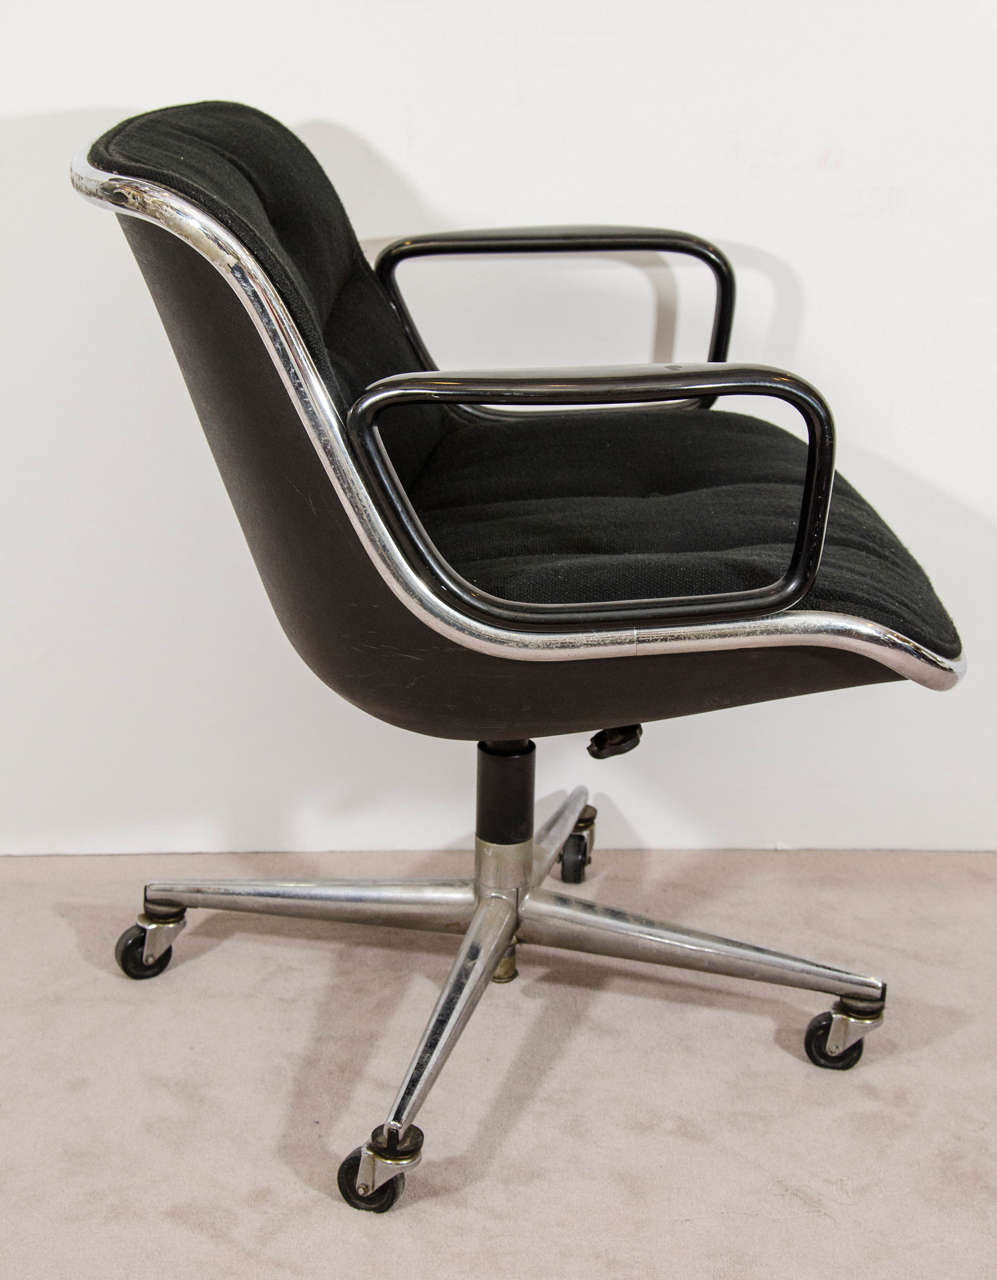 American Midcentury Charles Pollock for Knoll Executive Chair with Original Label